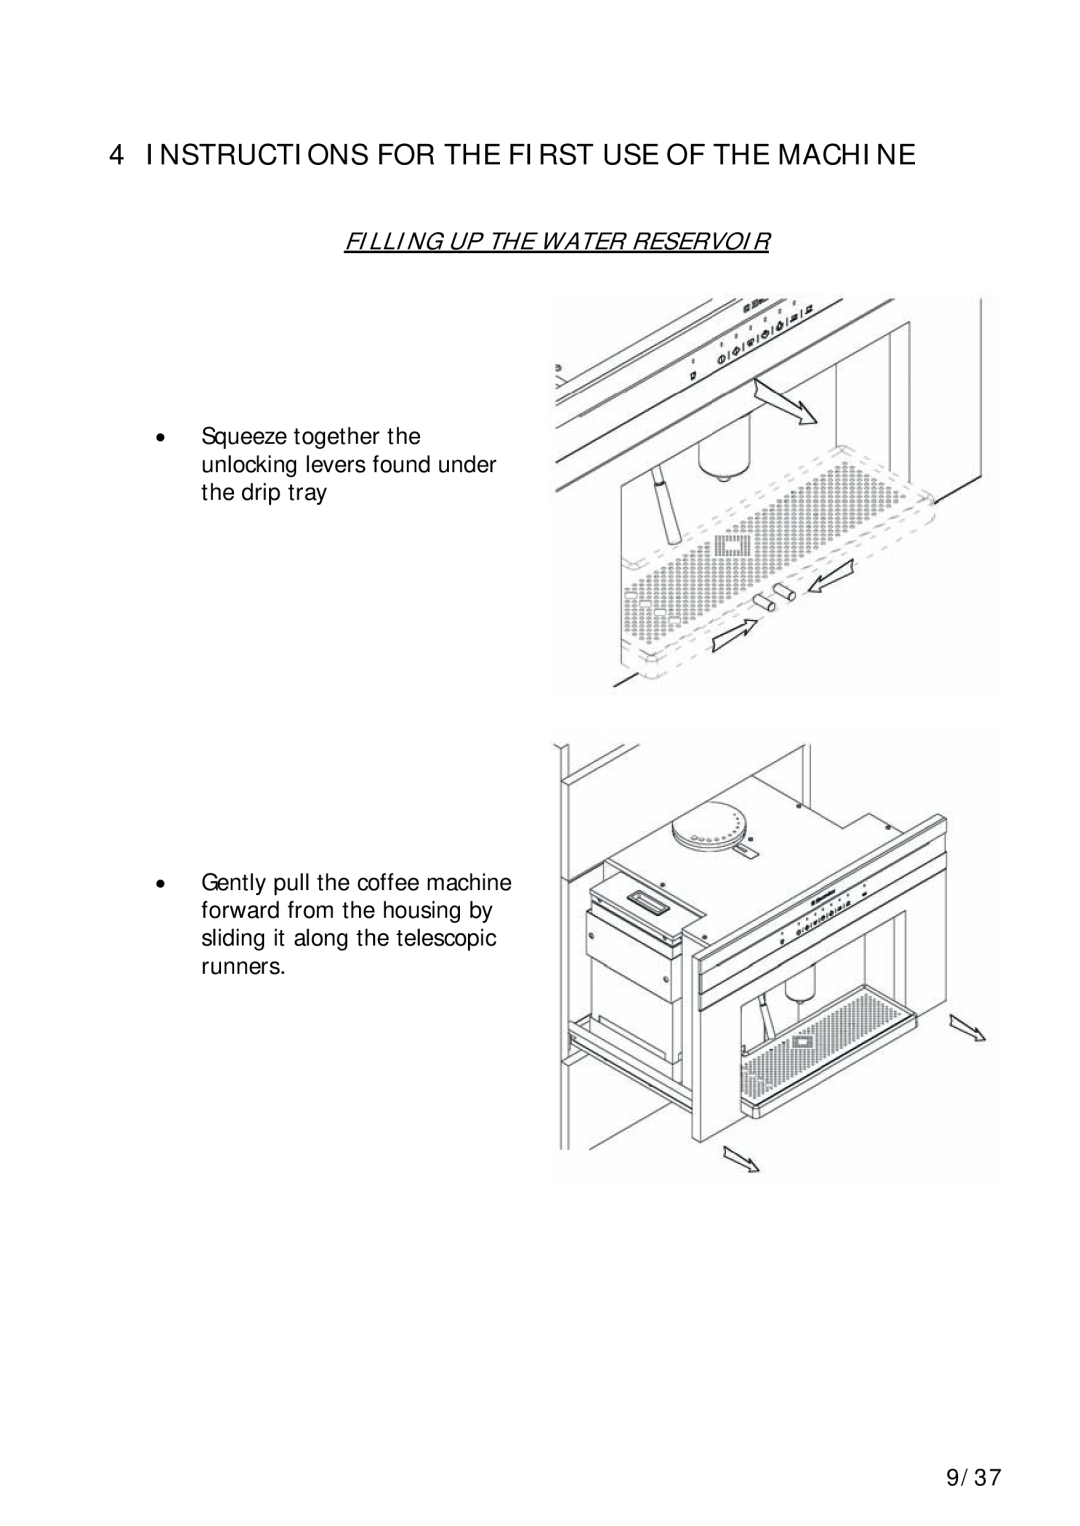 Electrolux EBA 60000X, EBA 60002X Instructions For The First Use Of The Machine, Filling Up The Water Reservoir, 9/37 